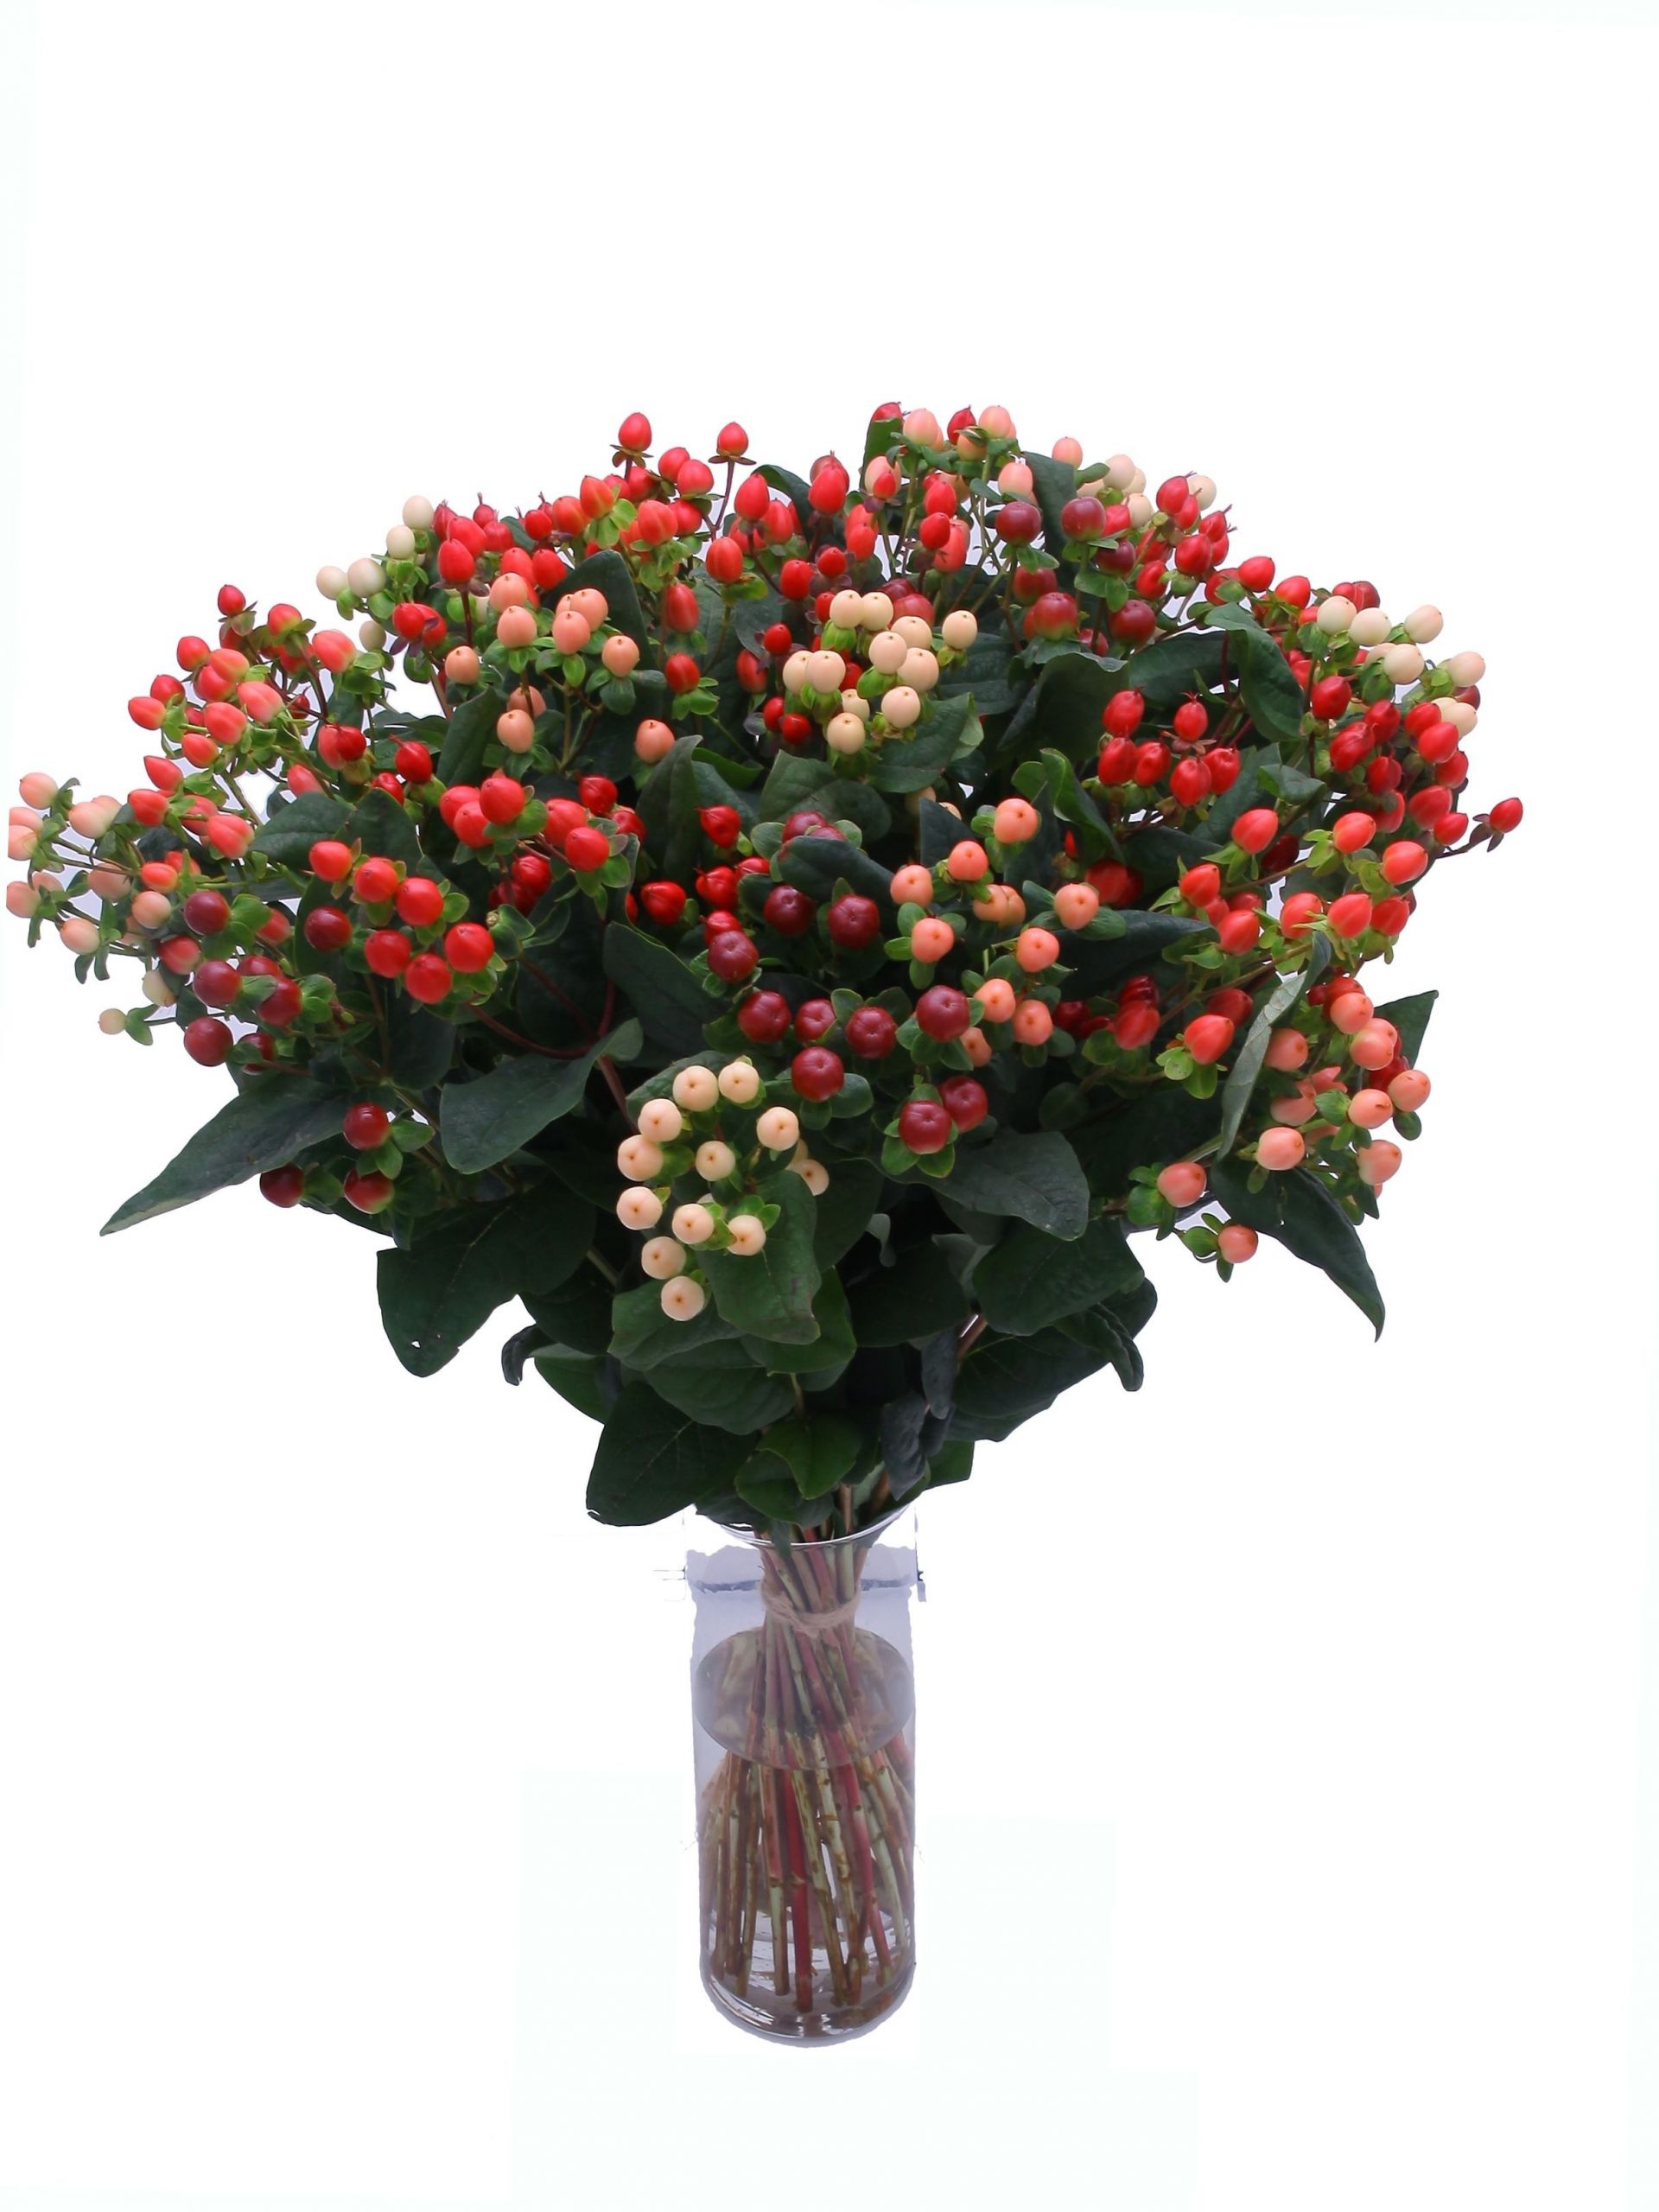 Red Christmas Flower Names
 If you want bright berries for Christmas for a traditional